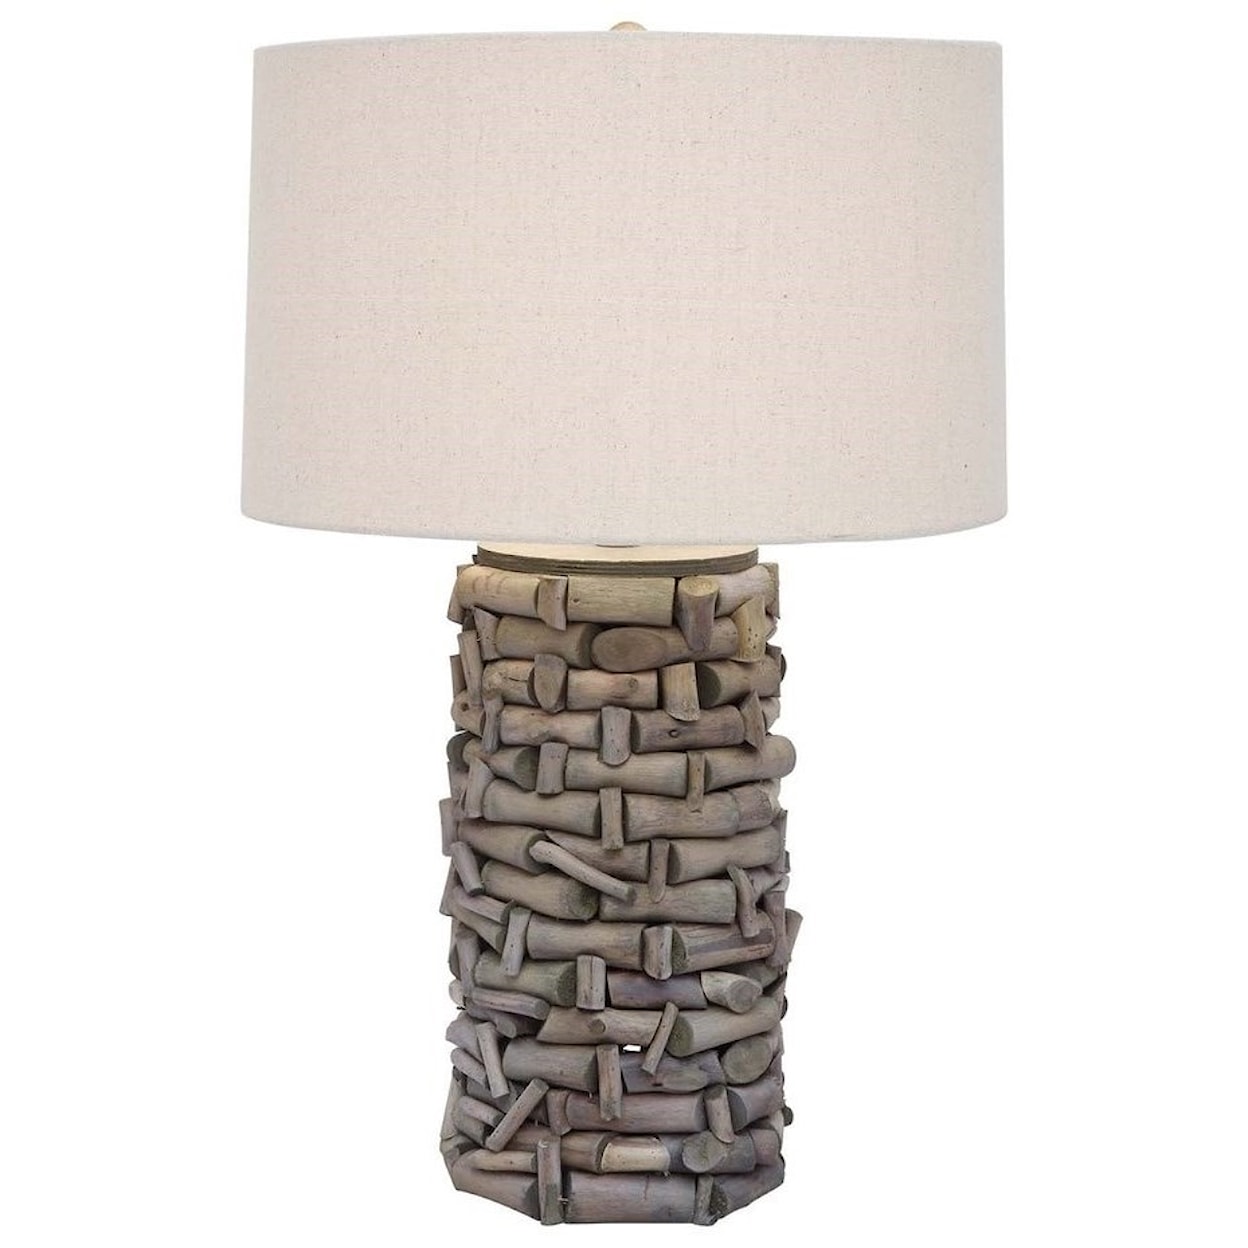 Crestview Collection Lighting Twig Branch Table Lamp